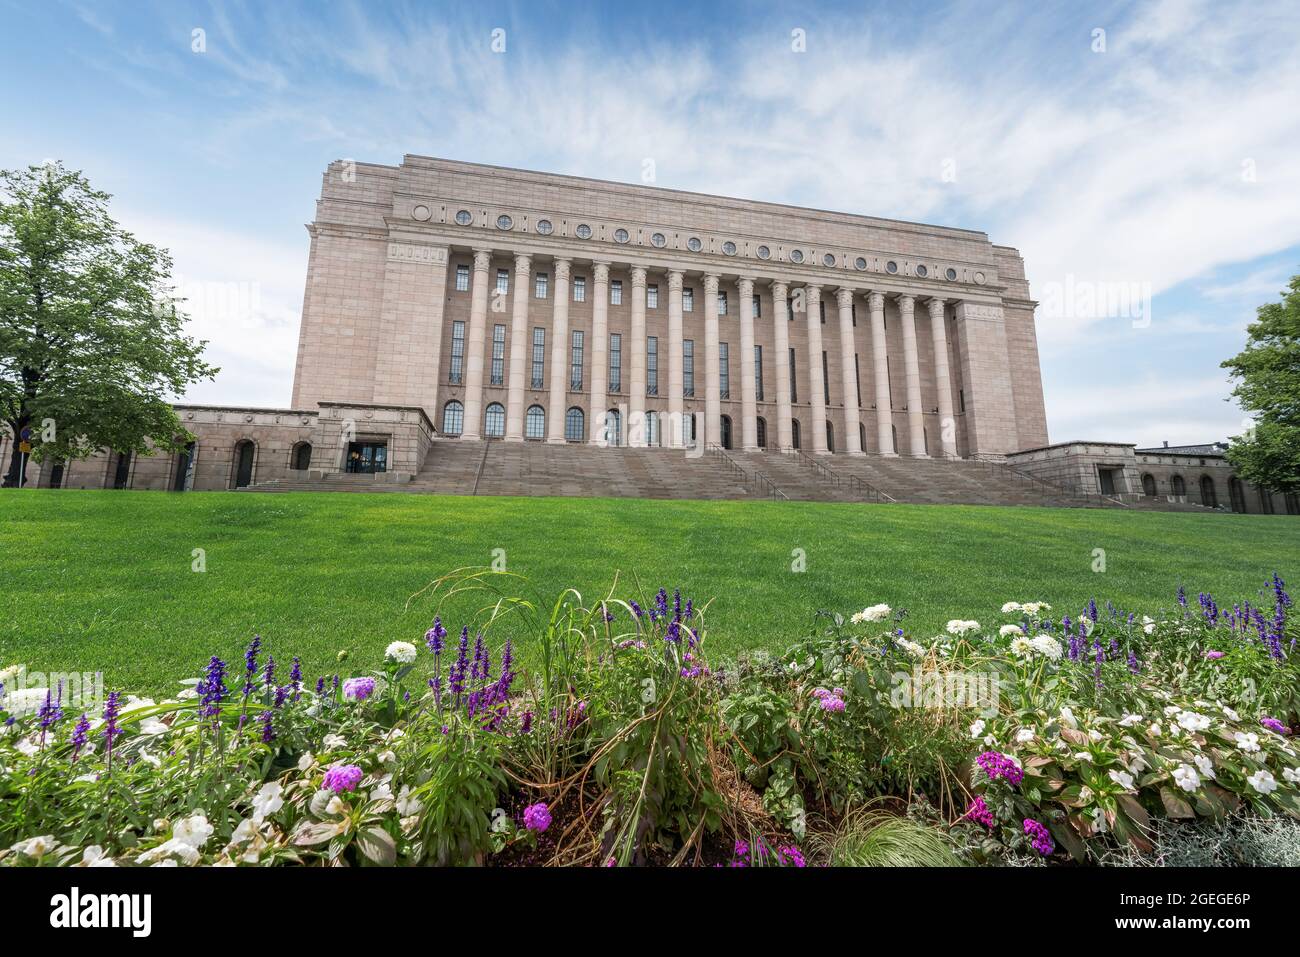 Parliament House - Parliament of Finland Building - Helsinki, Finland Stock Photo